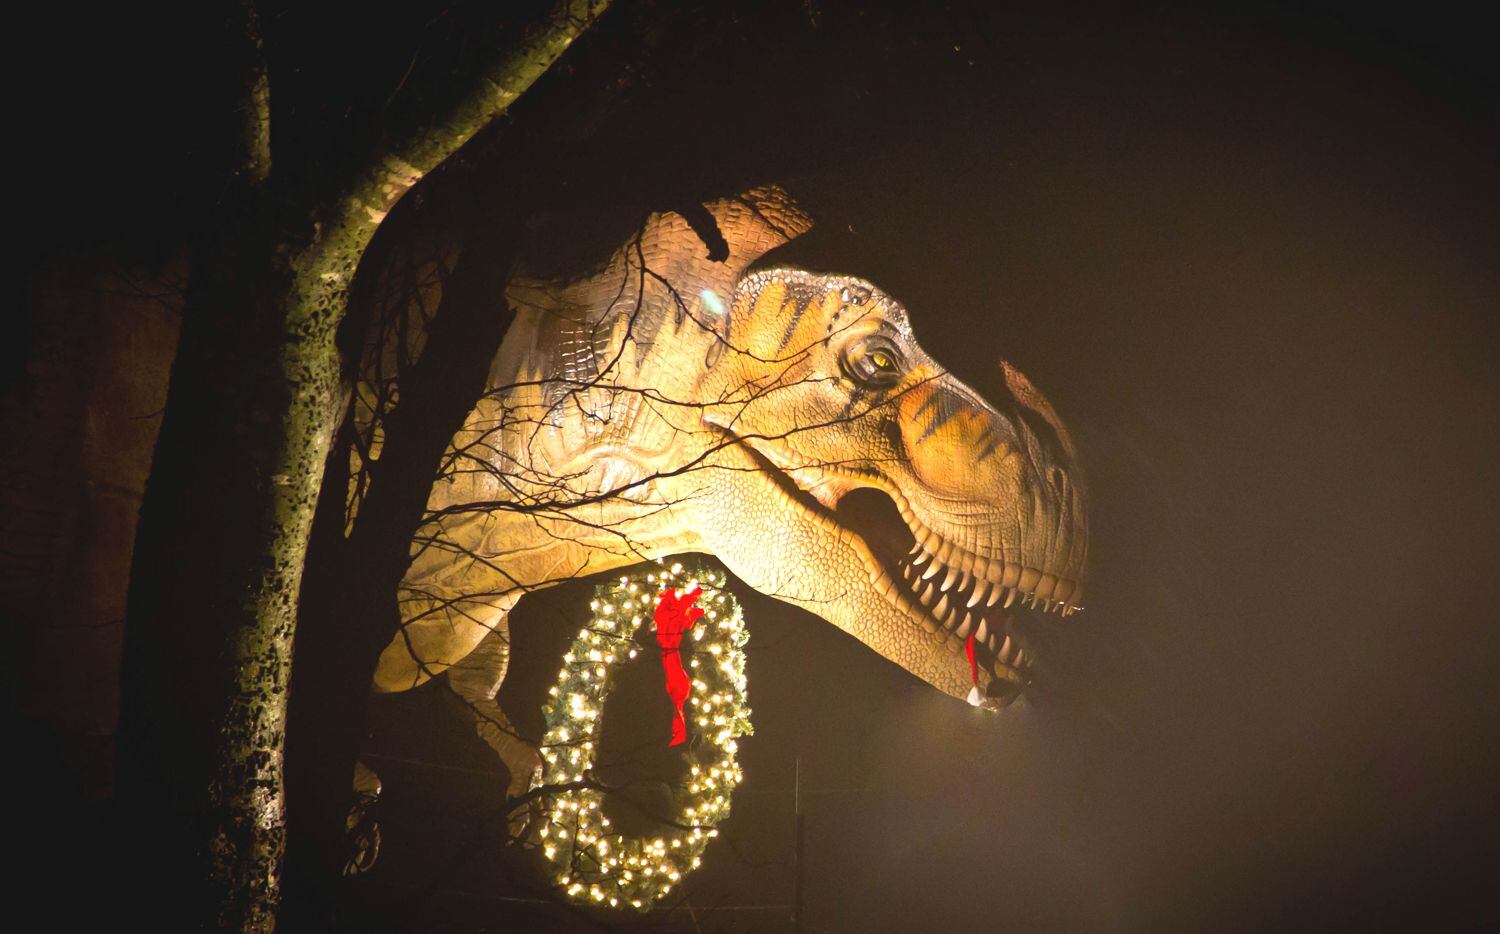 A Tyrannosaurus rex decked out in holiday décor